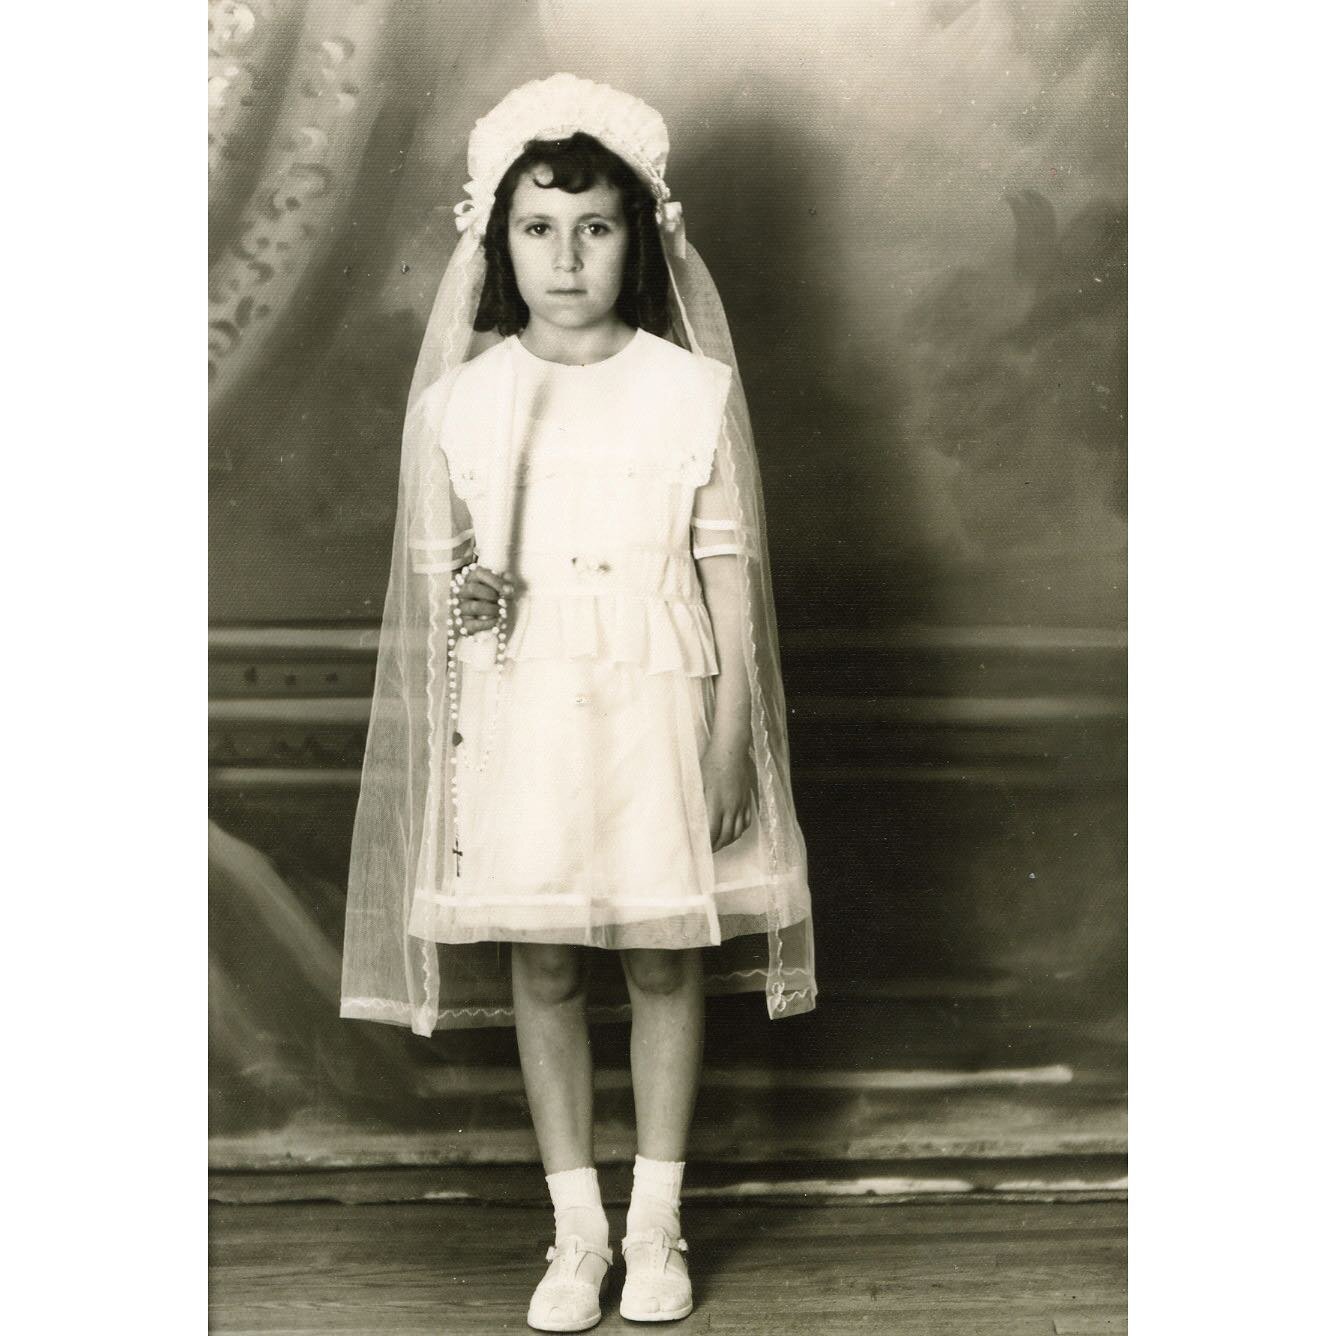 Beatrice's first communion.